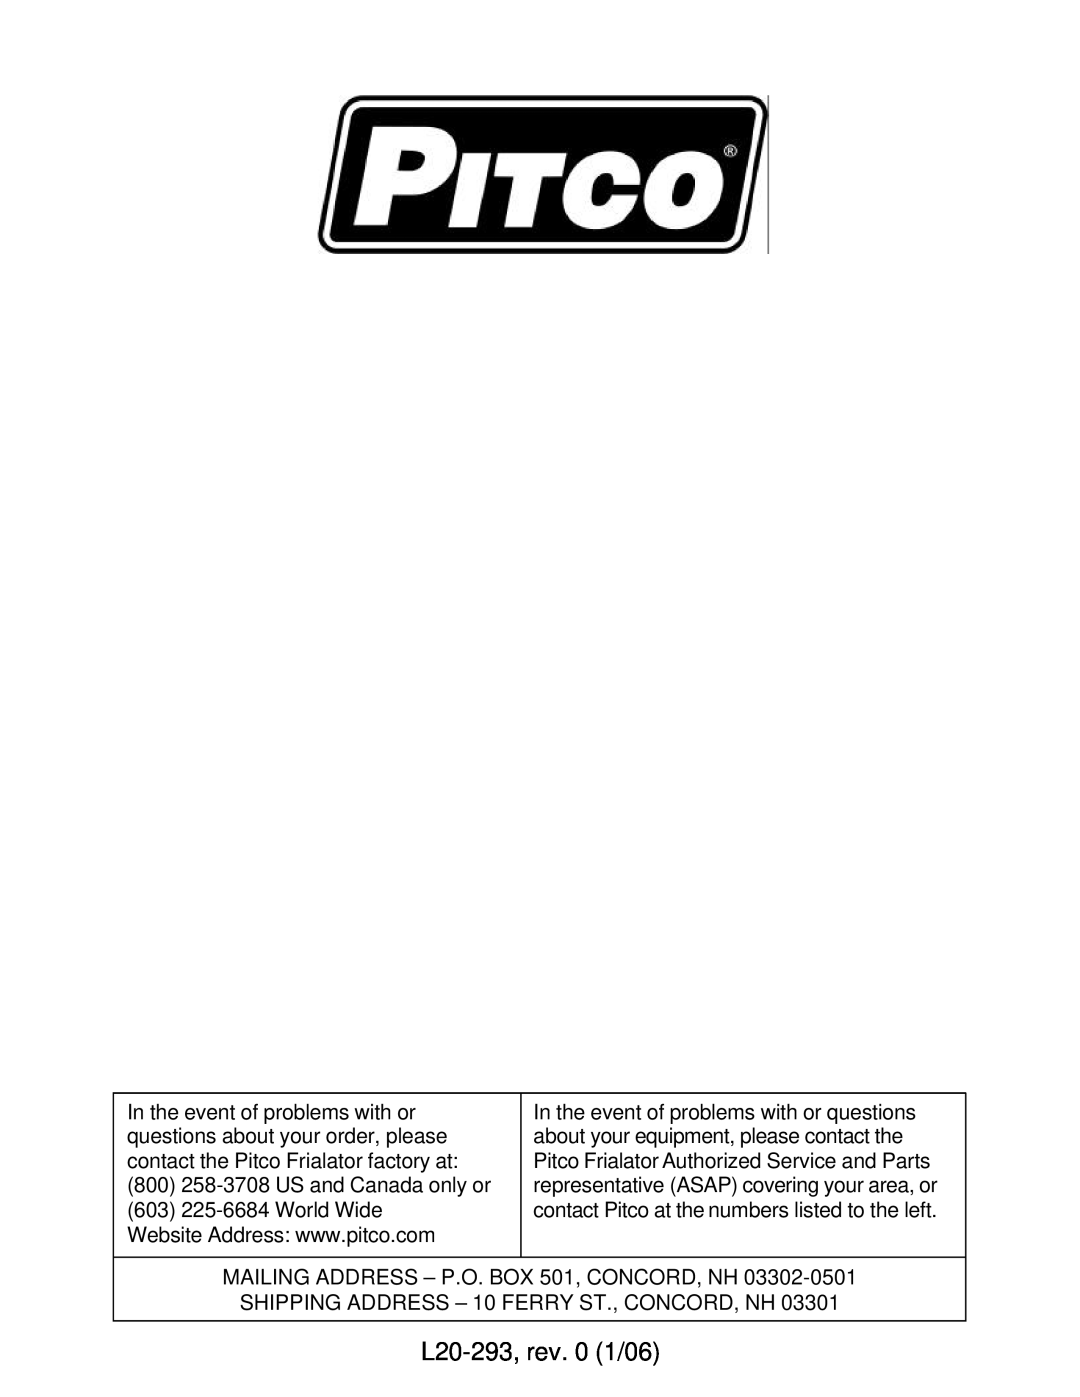 Pitco Frialator operation manual L20-293, rev. 0 1/06, 800 258-3708 US and Canada only or 603 225-6684 World Wide 